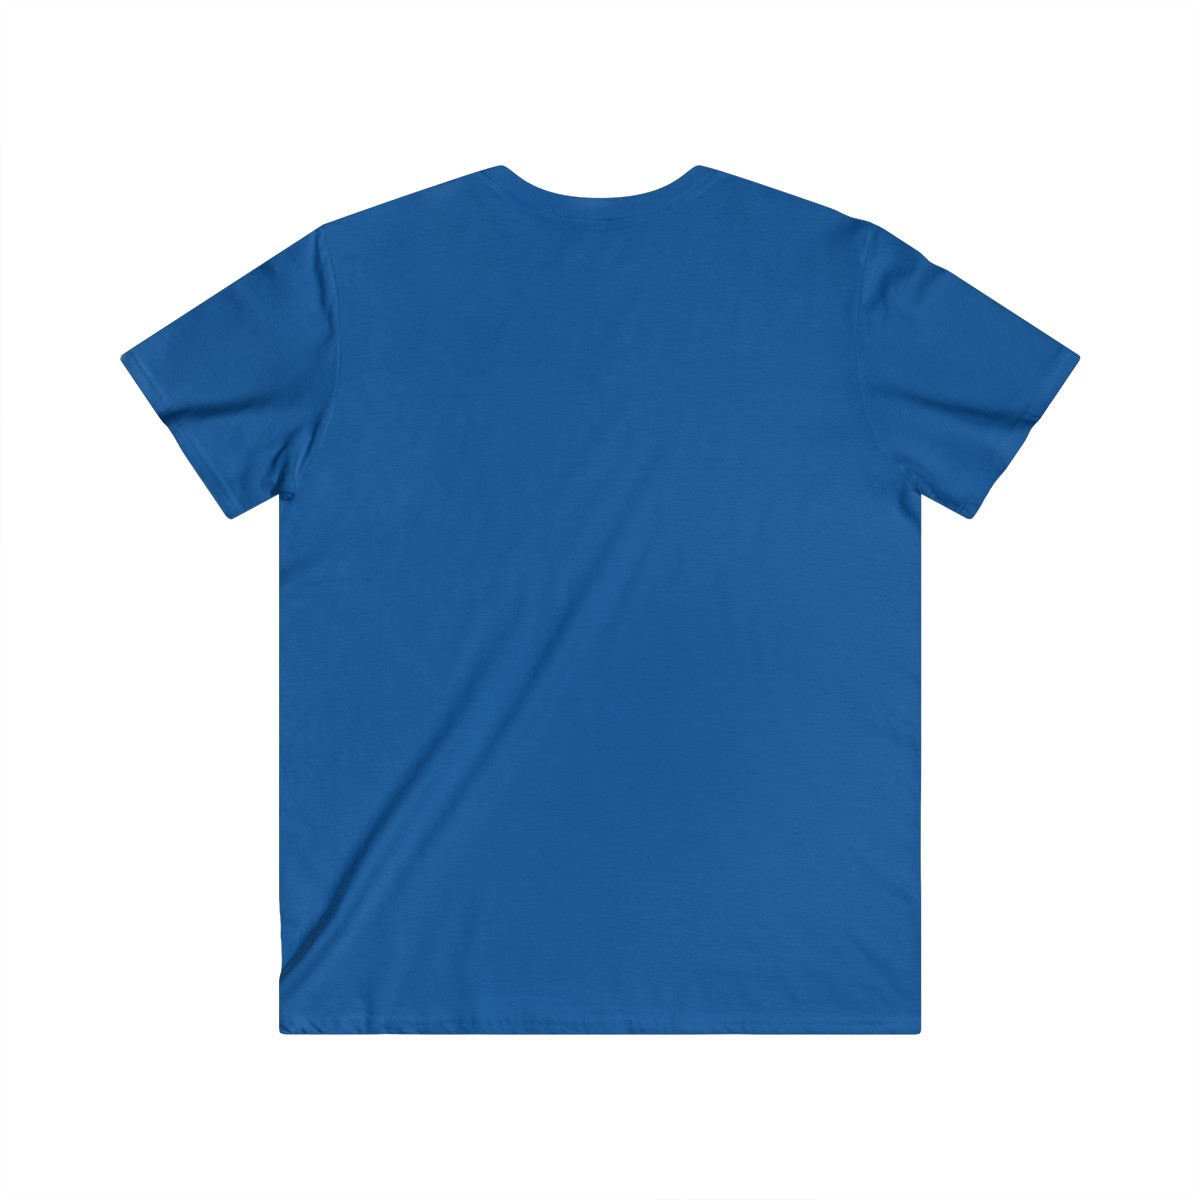 Men's Fitted V-Neck Short Sleeve Tee product thumbnail image